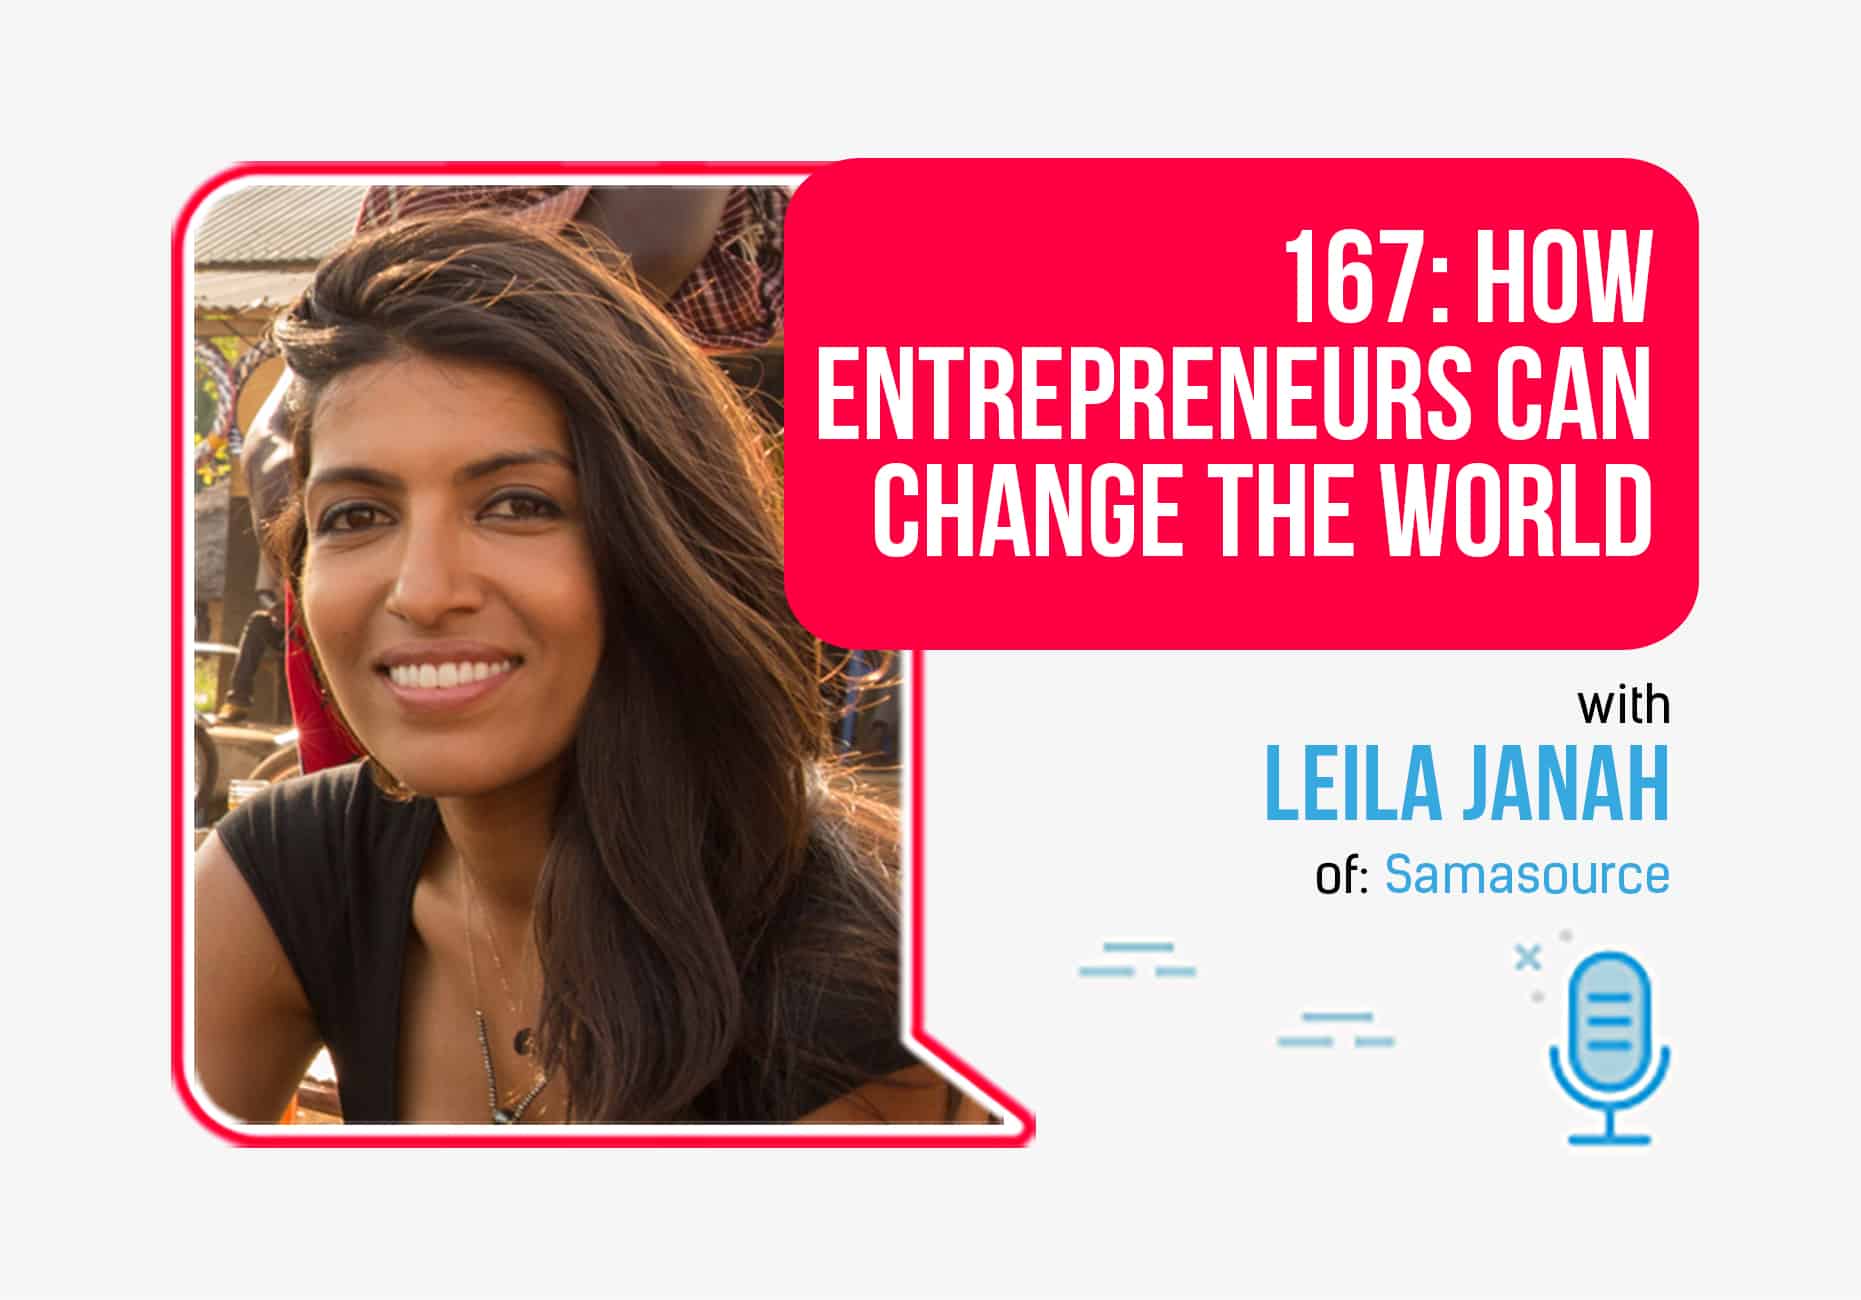 How Entrepreneurs Can Change the World,with Leila Janah -FP167 - 1861 x 1300 jpeg 587kB